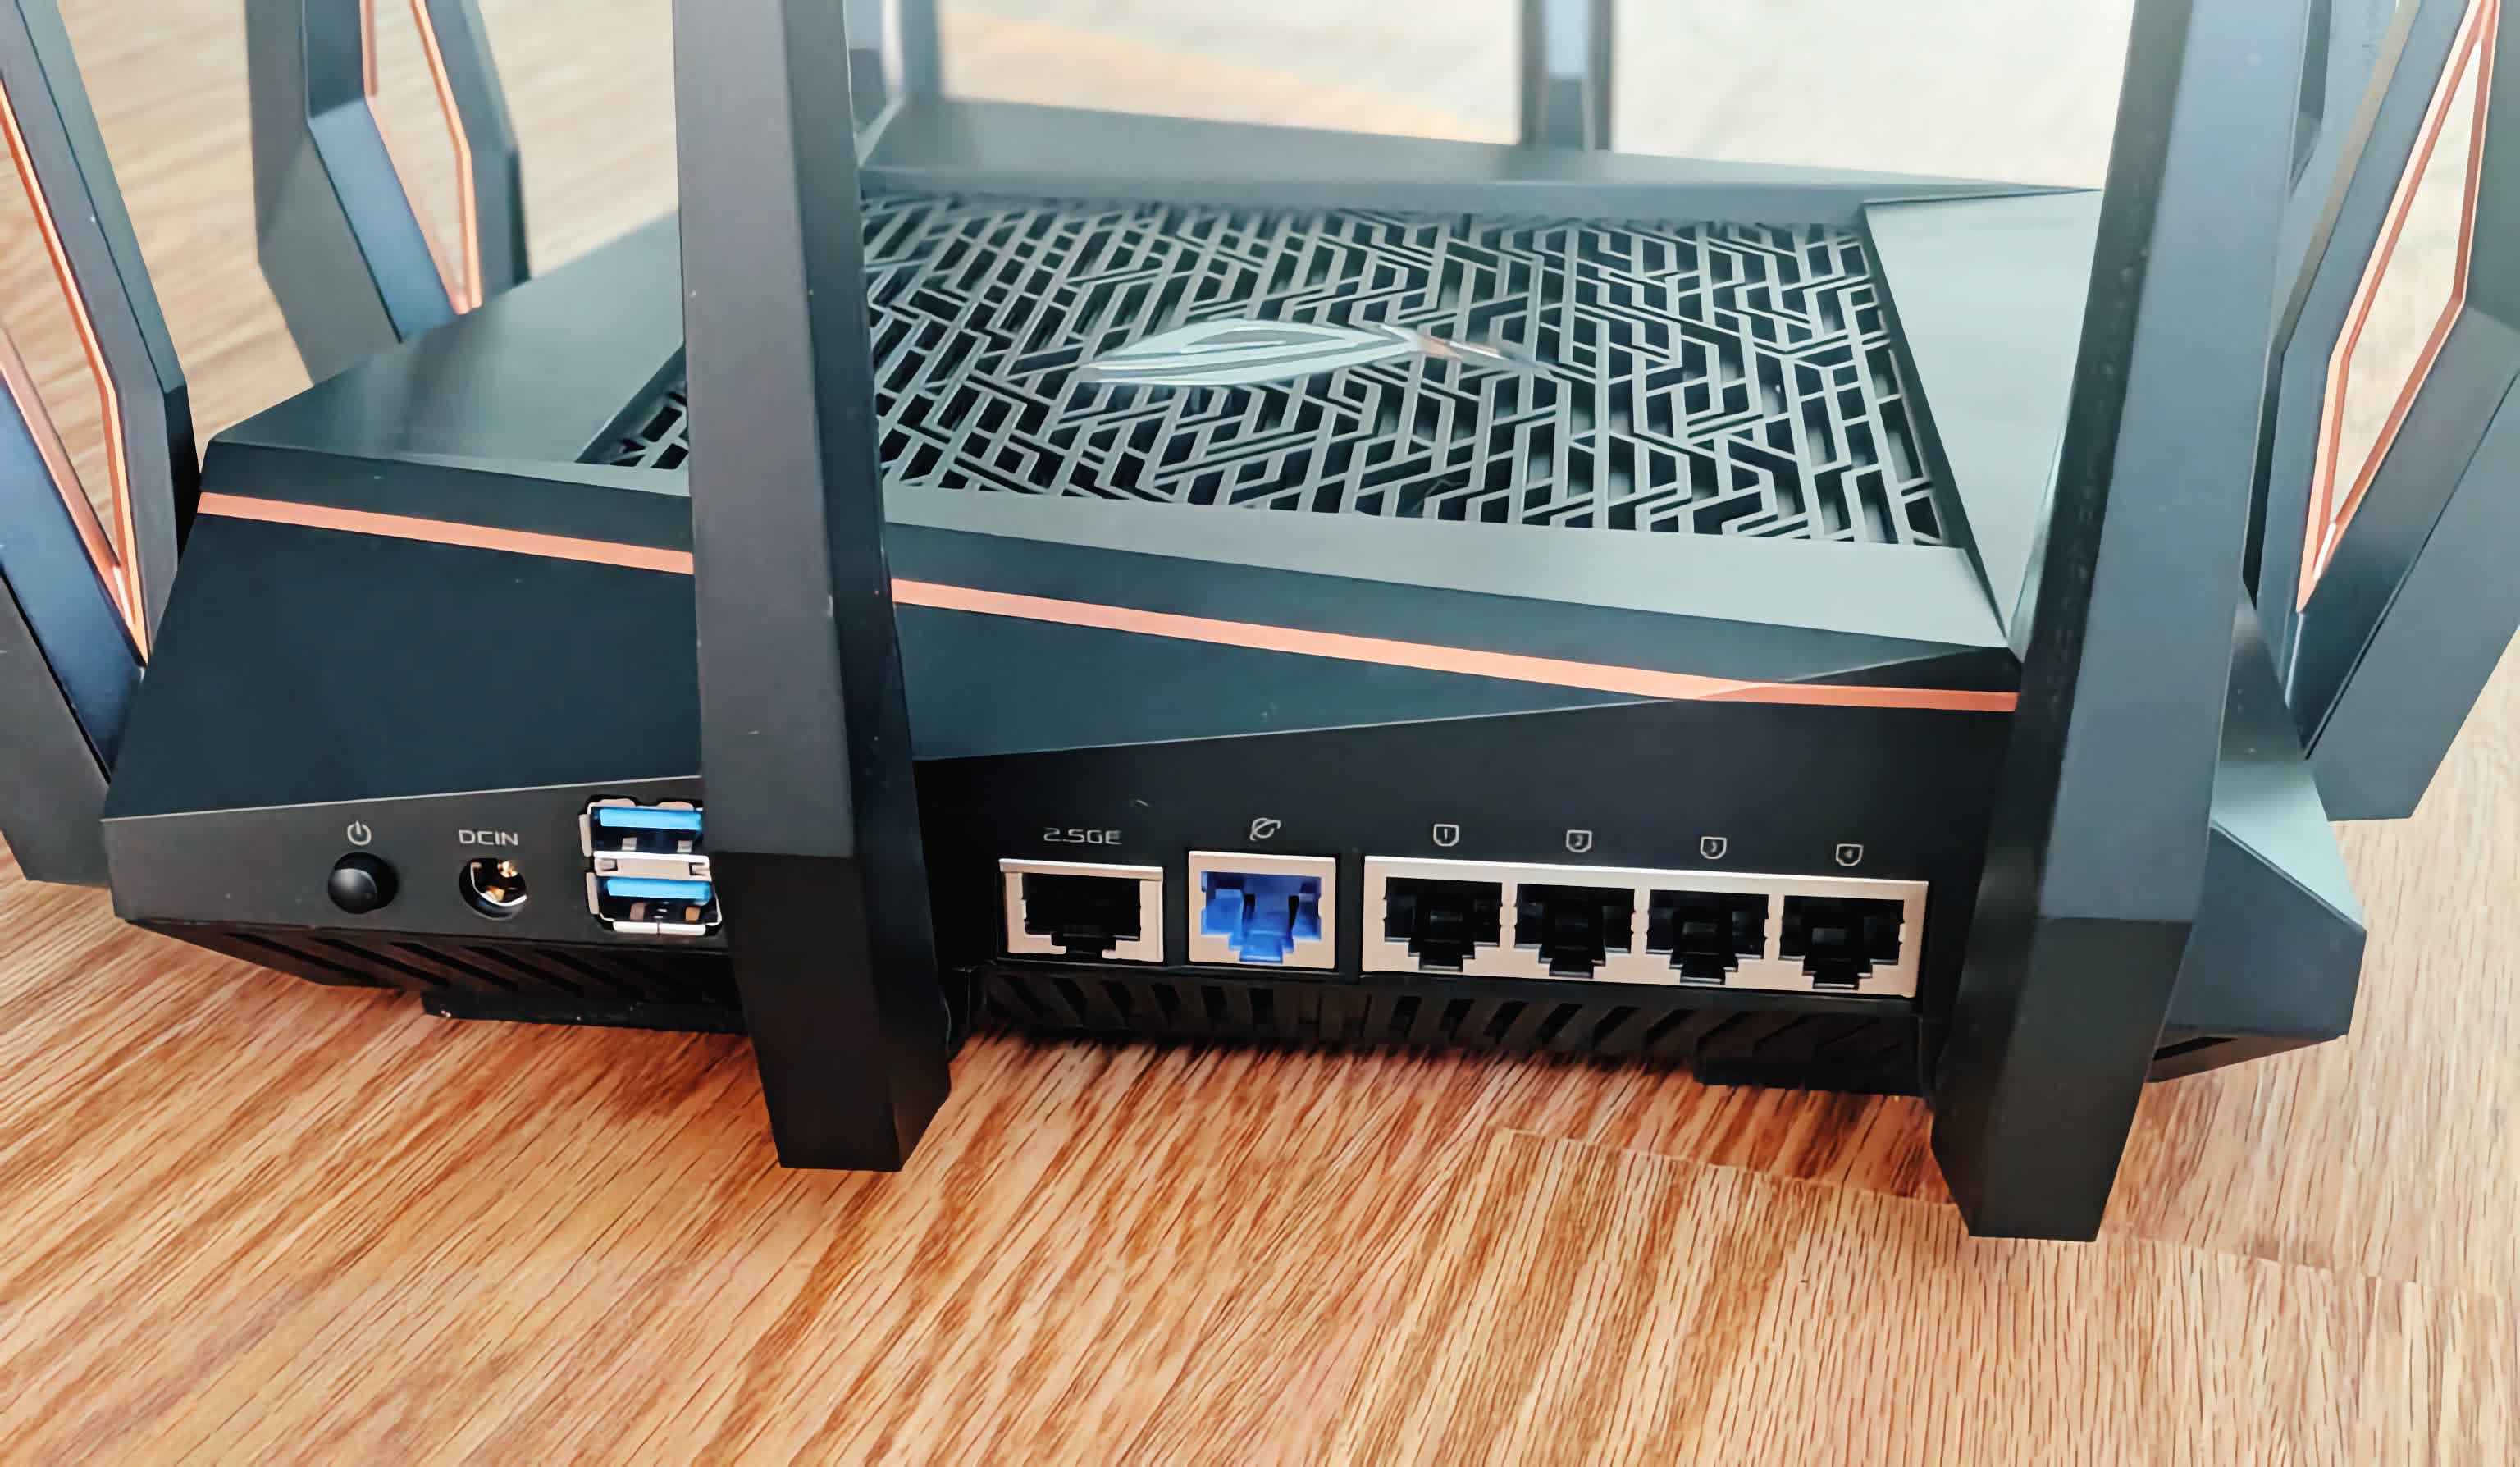 Update your firmware immediately if you own one of these 19 Asus routers